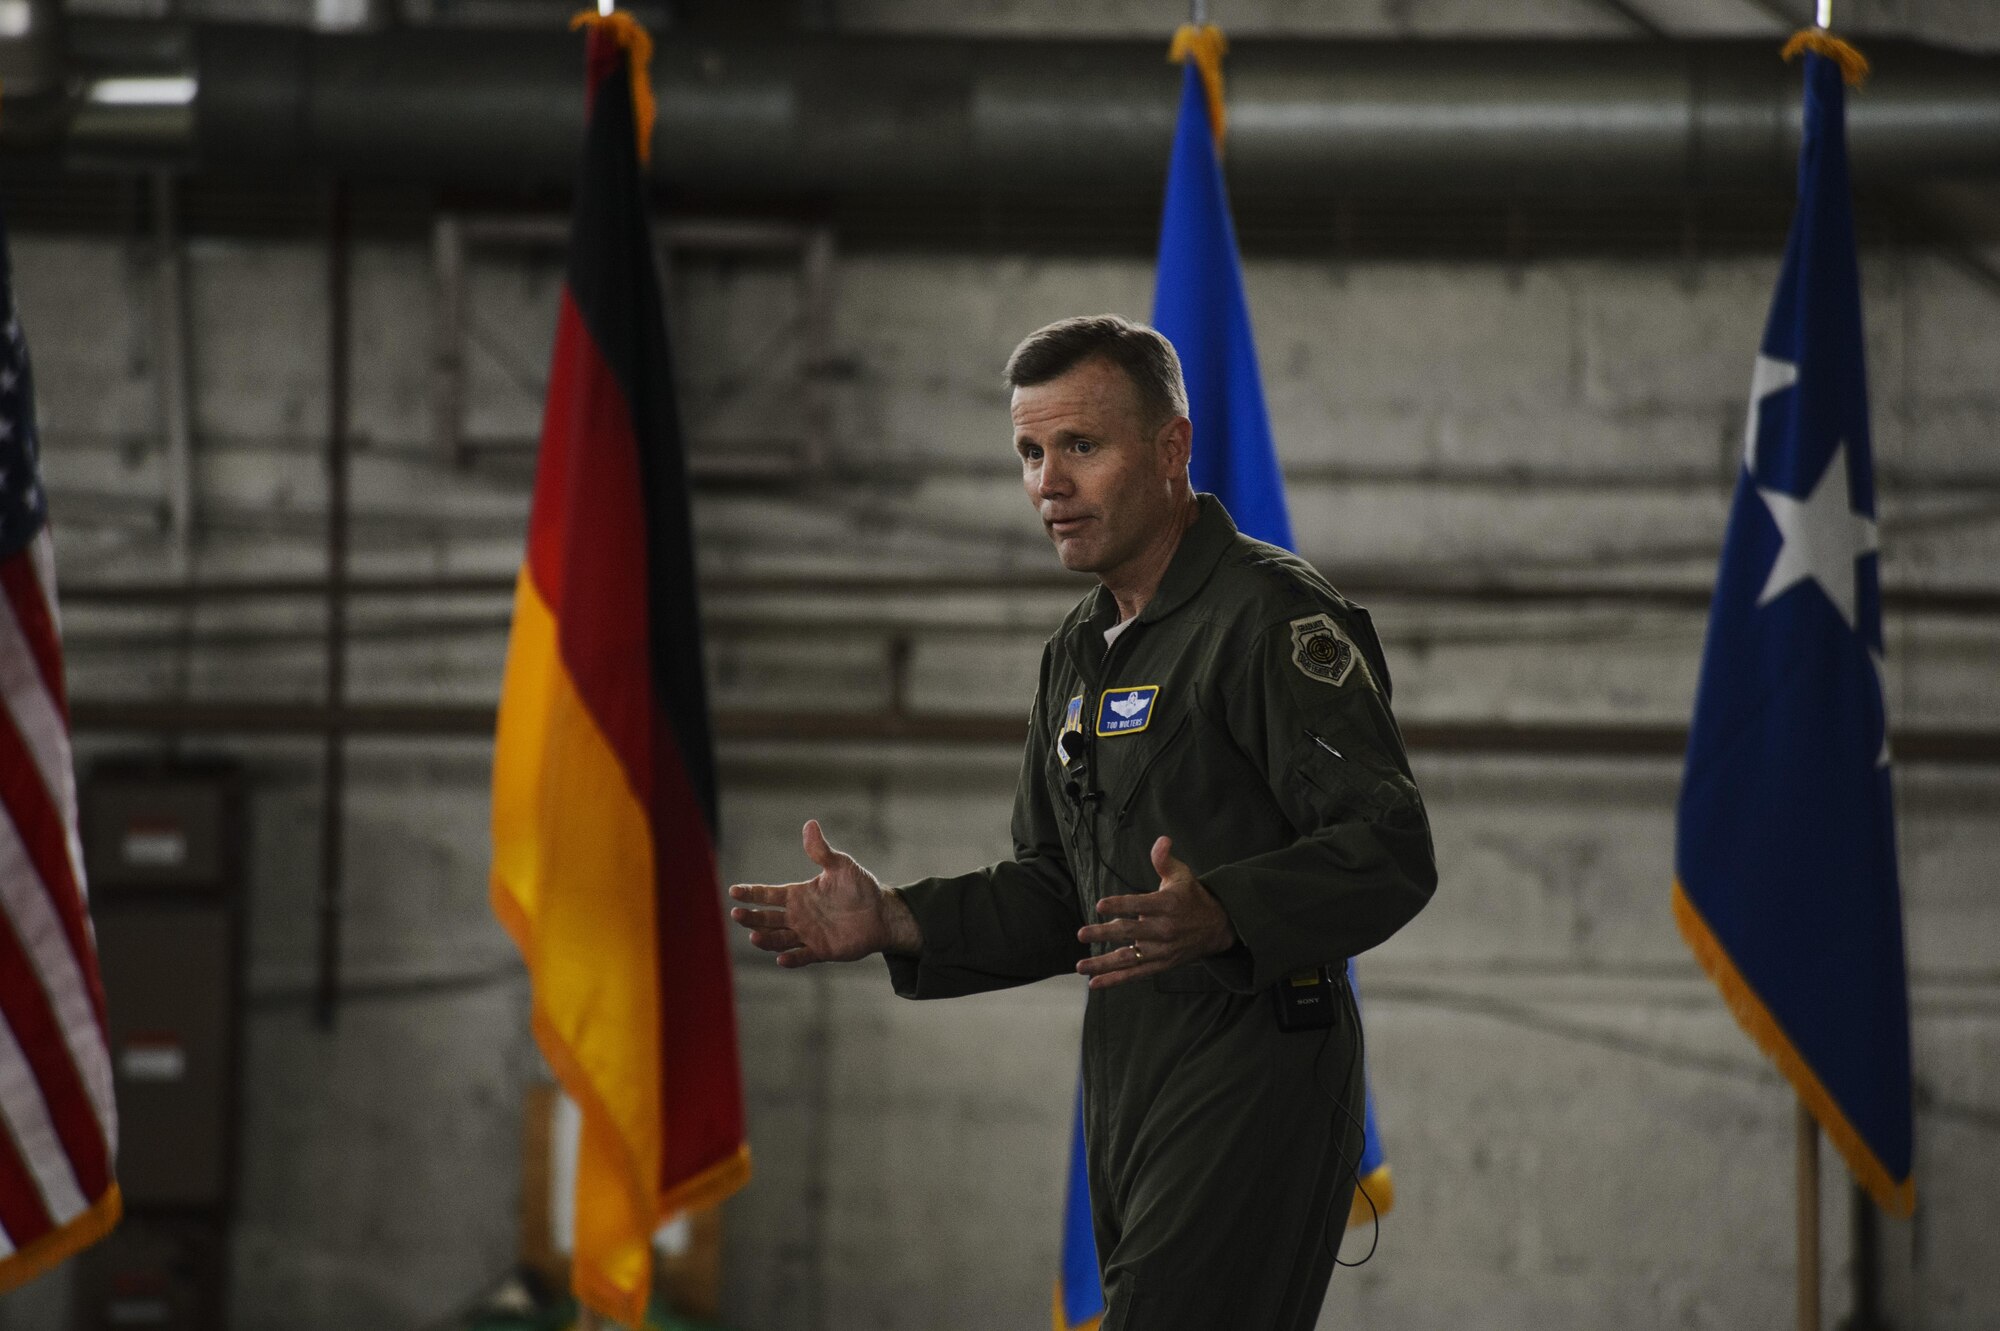 Gen. Tod D. Wolters, U.S. Air Forces in Europe and Air Forces Africa commander, talks about his priorities during an all call at Hangar One on Spangdahlem Air Base, Germany, Oct. 6, 2016.
This visit represented his first time at Spangdahlem Air Base since assuming command in August 2016. (U.S. Air Force photo by Staff Sgt. Jonathan Snyder)